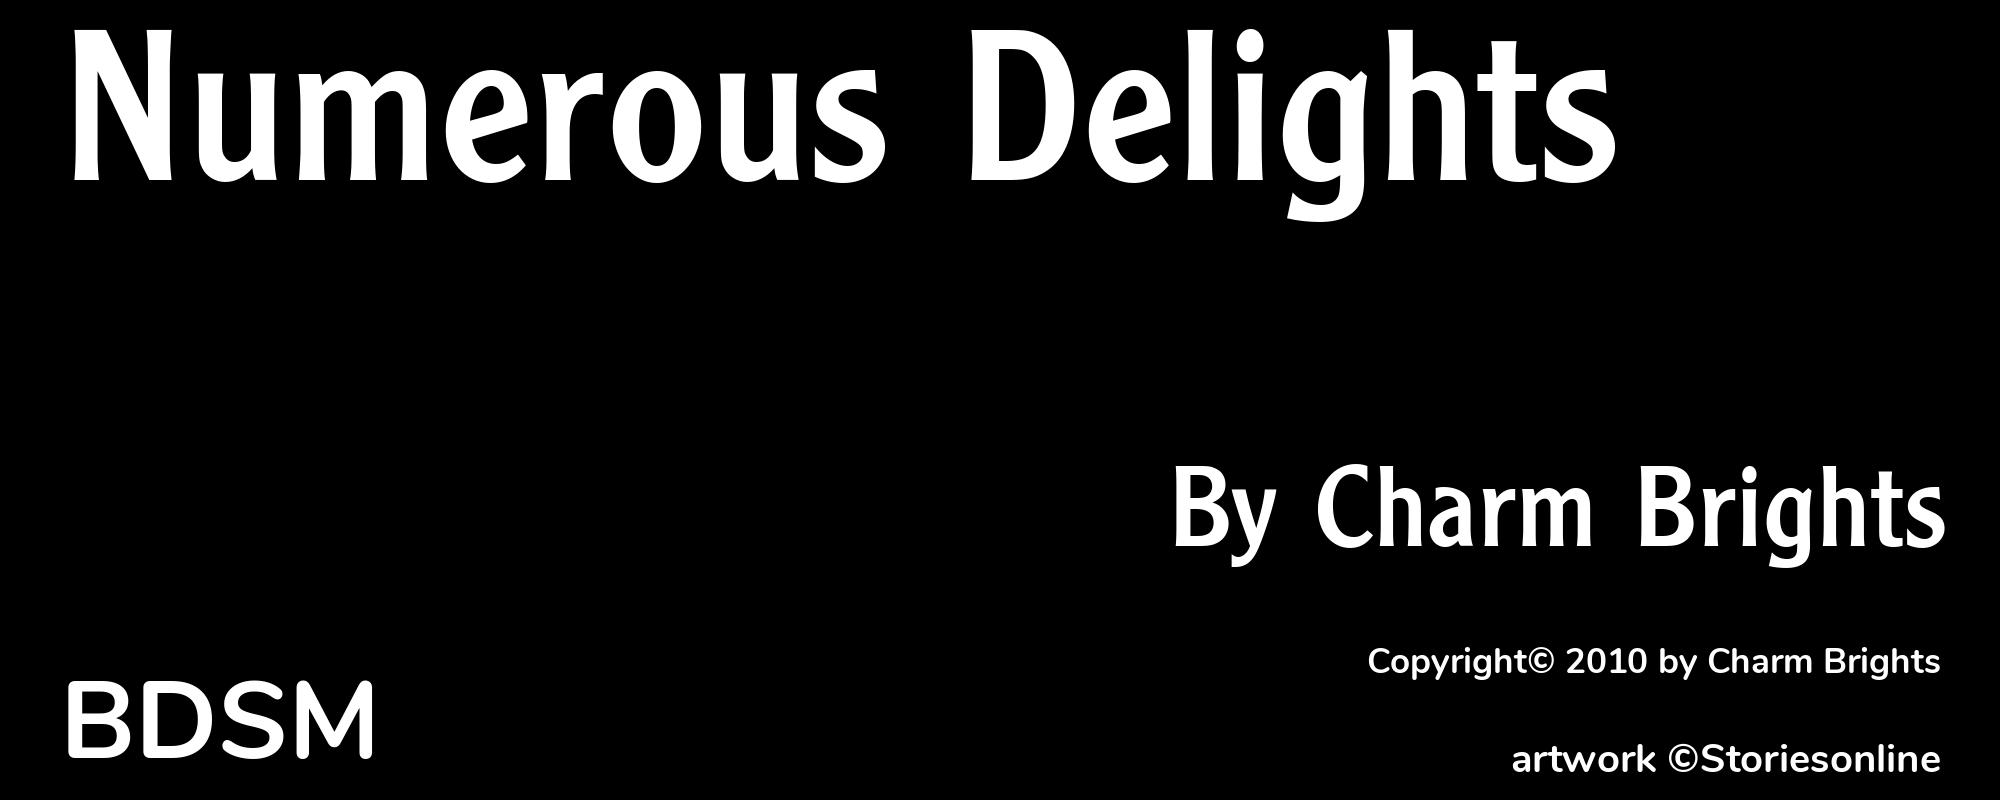 Numerous Delights - Cover